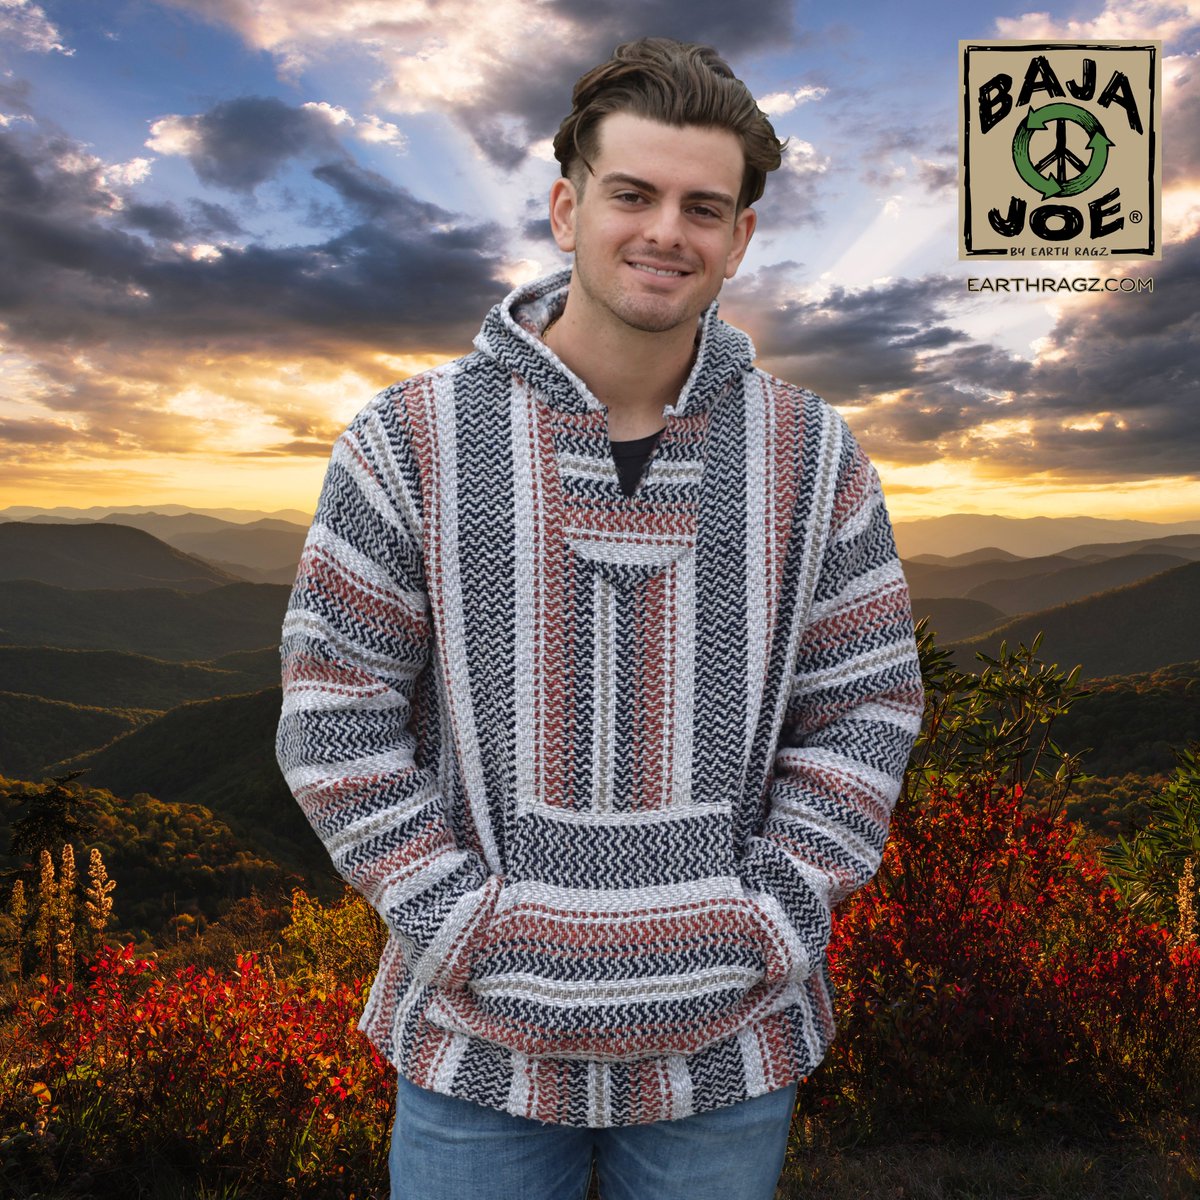 Does our Baja hoodie in Rust match your springtime vibe? Probably not, but hey, it tries.
#bajajoe #bajajoehoodie #bajahoodie #drugrug #hoodie #poncho #sustainablefashion #sustainableclothing #recycledfibers #hippiestyle #hippie #bajahoodies #boho #bohochic #retro #classicBaja